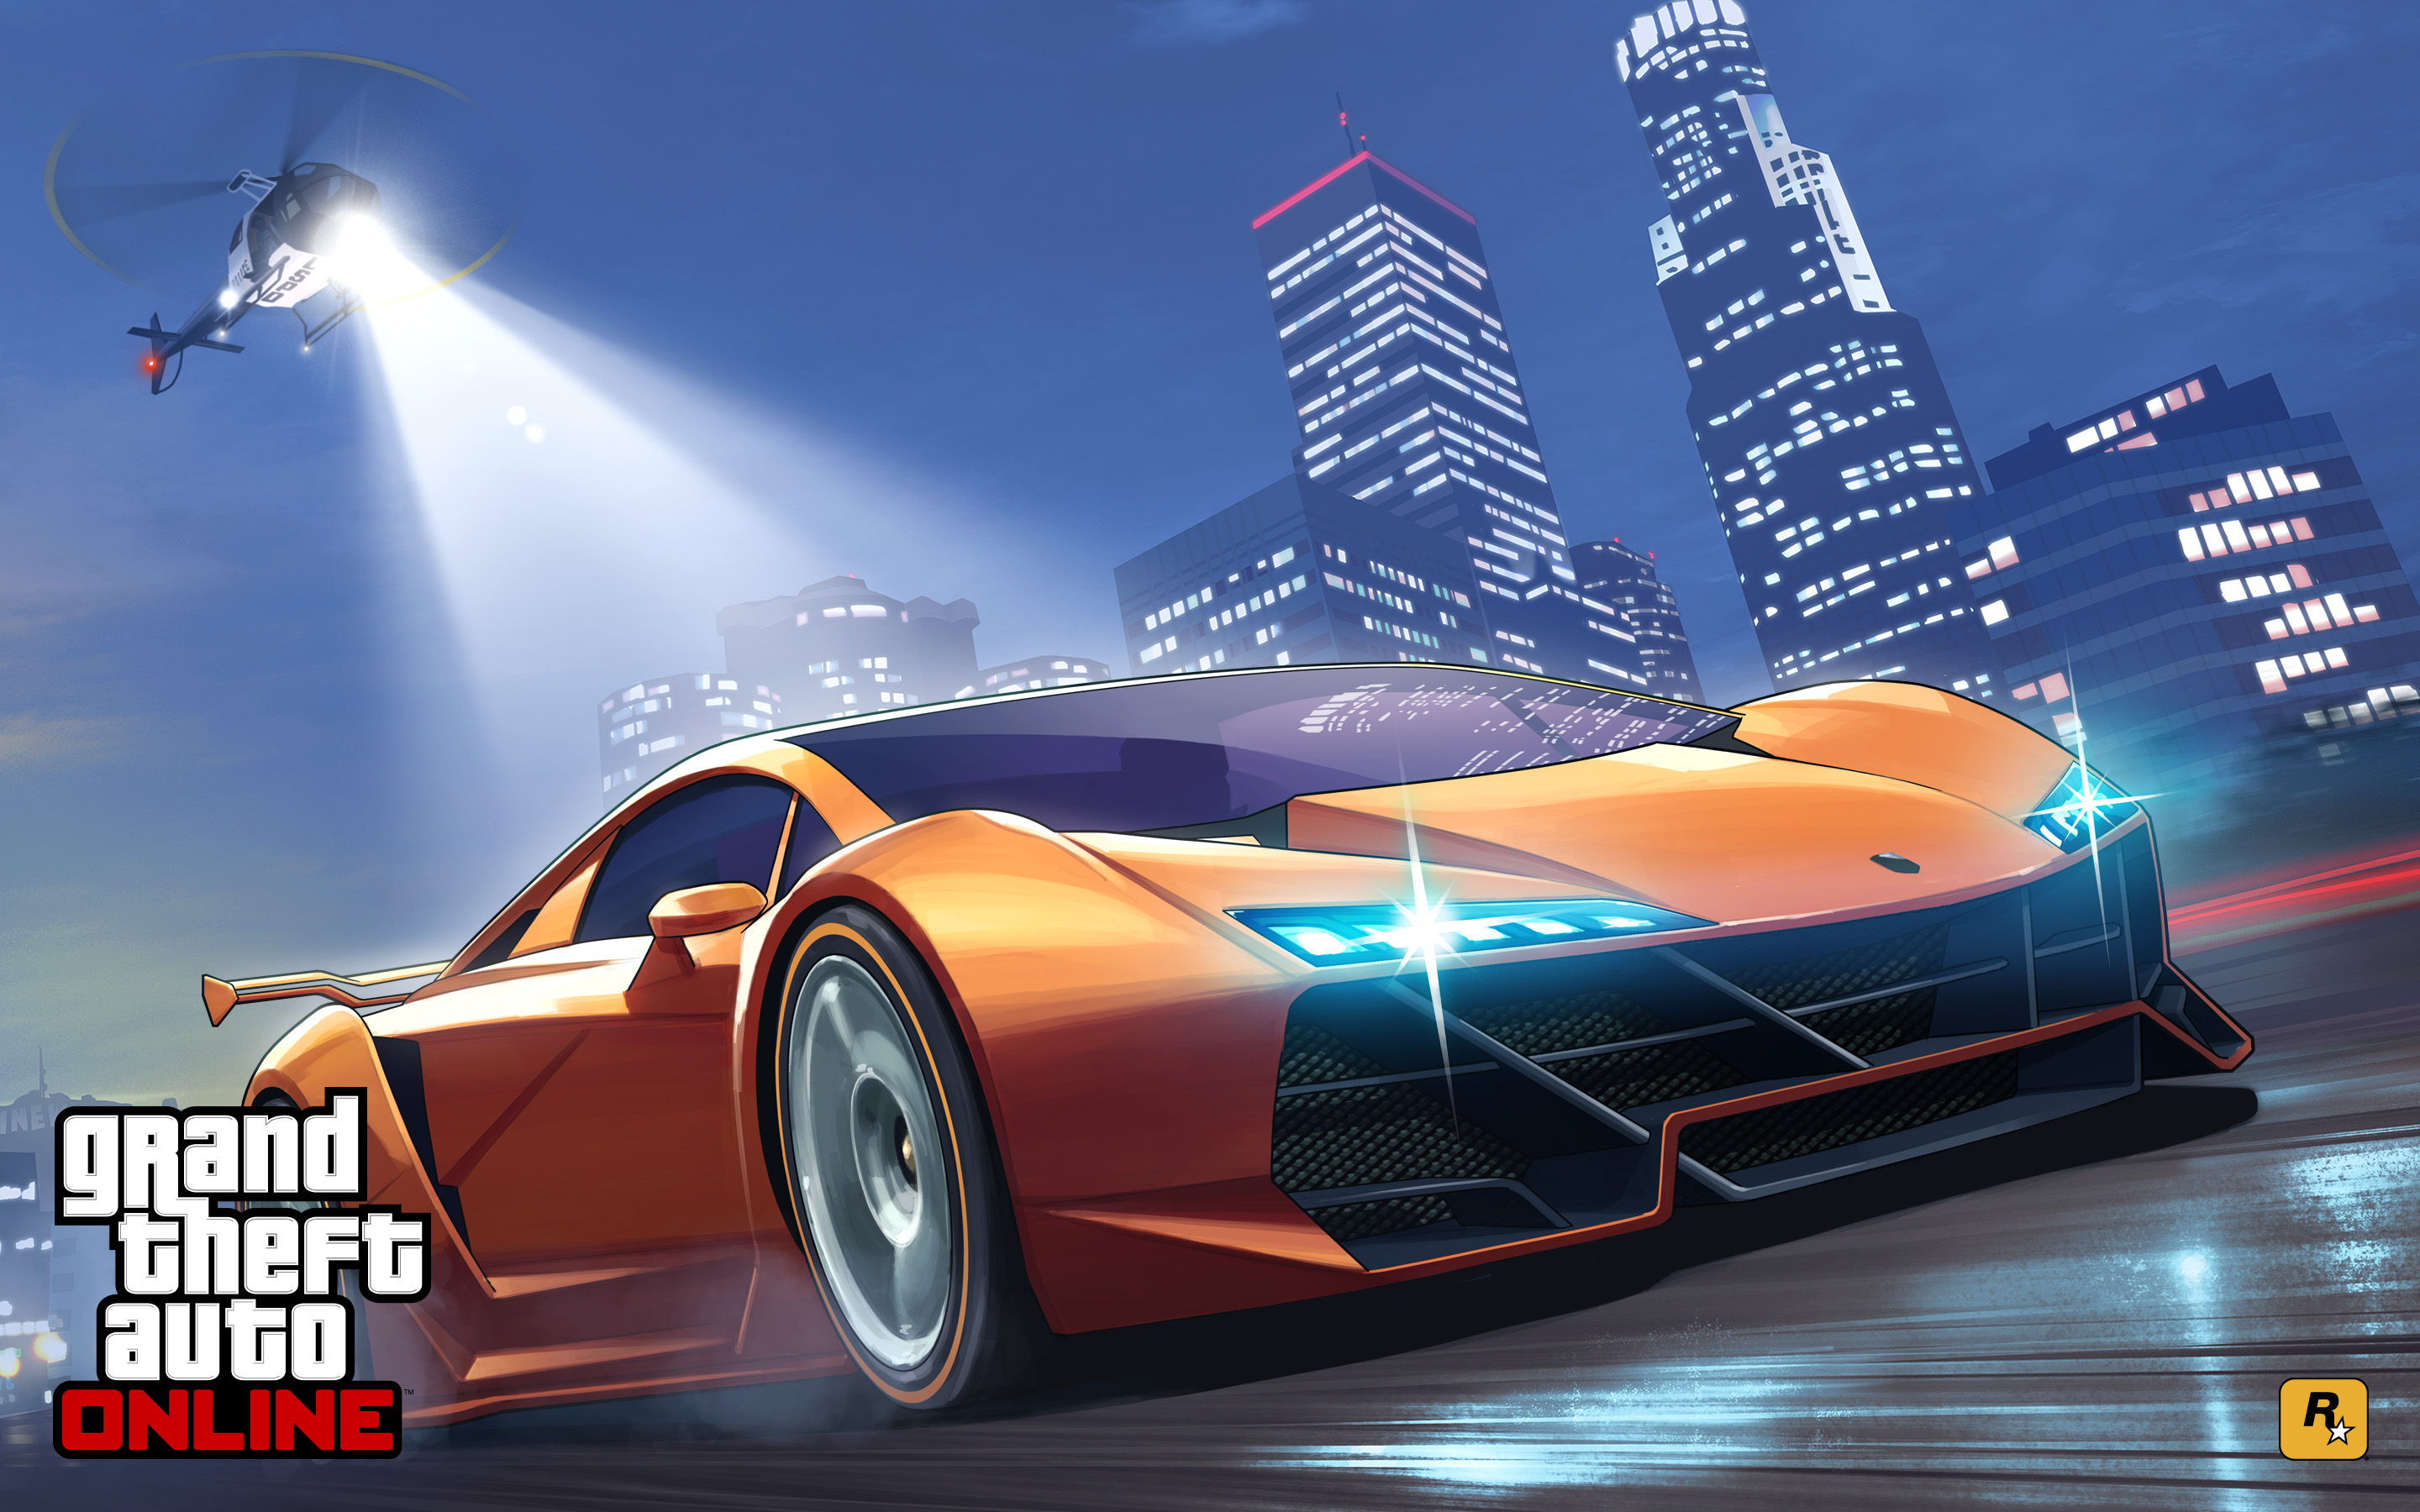 Grand Theft Auto Online Game Exclusive HD Wallpaper